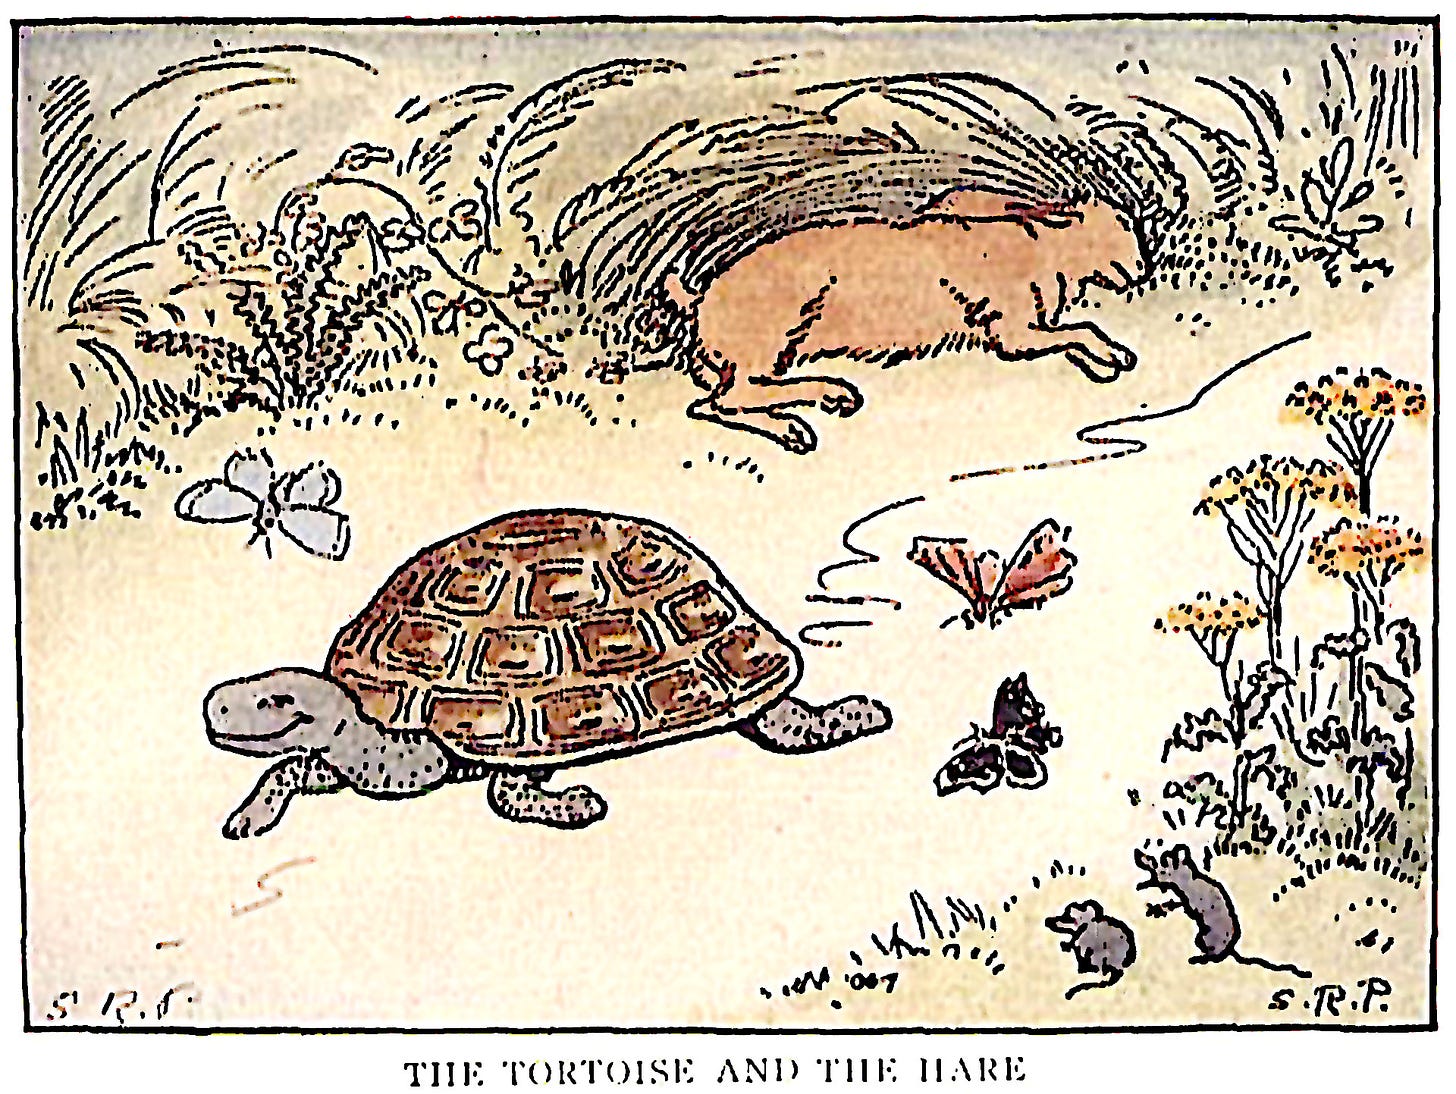 a smiling tortoise passing a sleeping hare while mice and butterflies watch